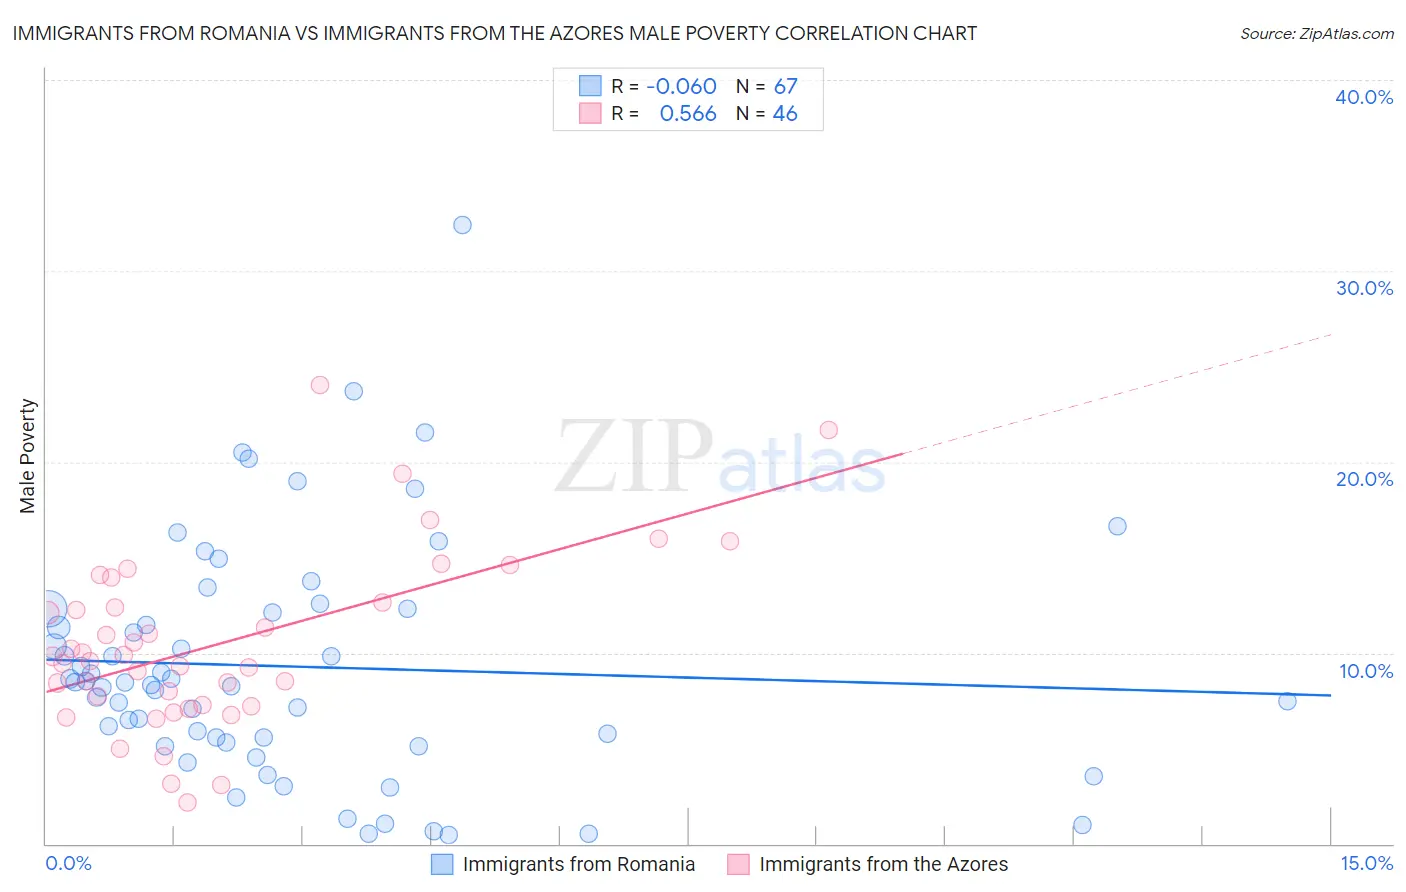 Immigrants from Romania vs Immigrants from the Azores Male Poverty